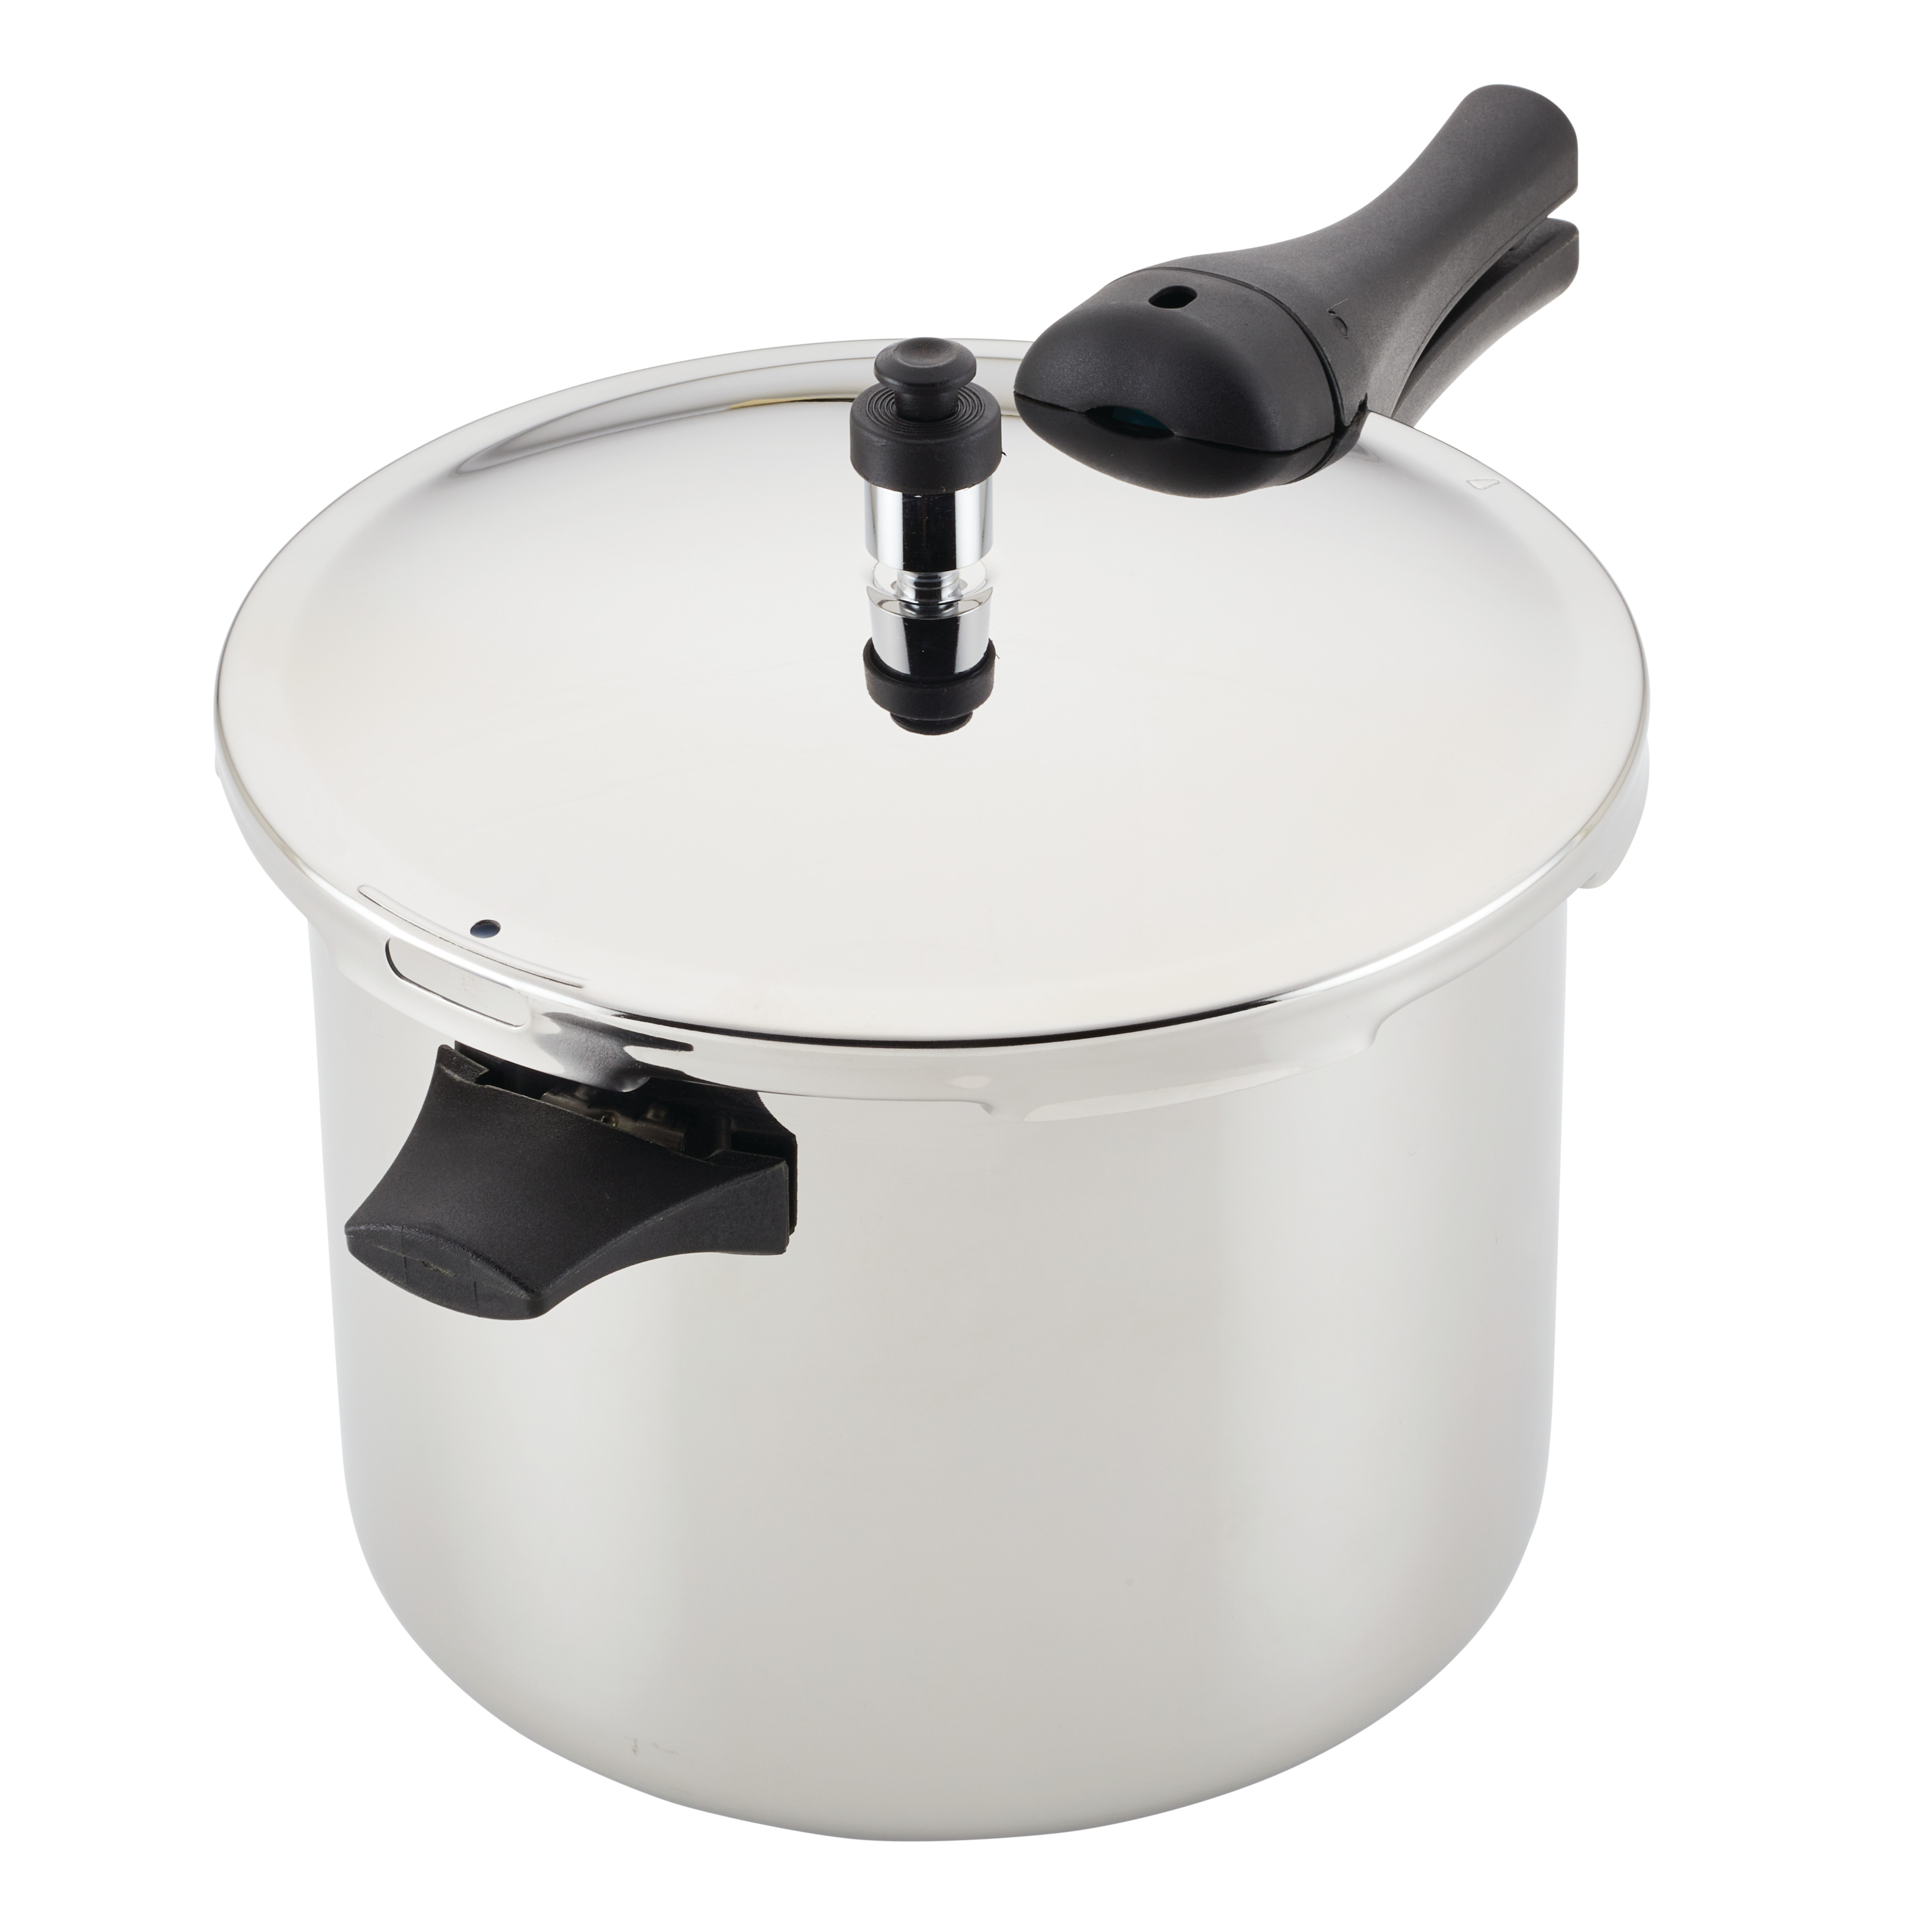 Farberware Stainless Steel Induction Stovetop Pressure Cooker, 8-Quart - image 1 of 12